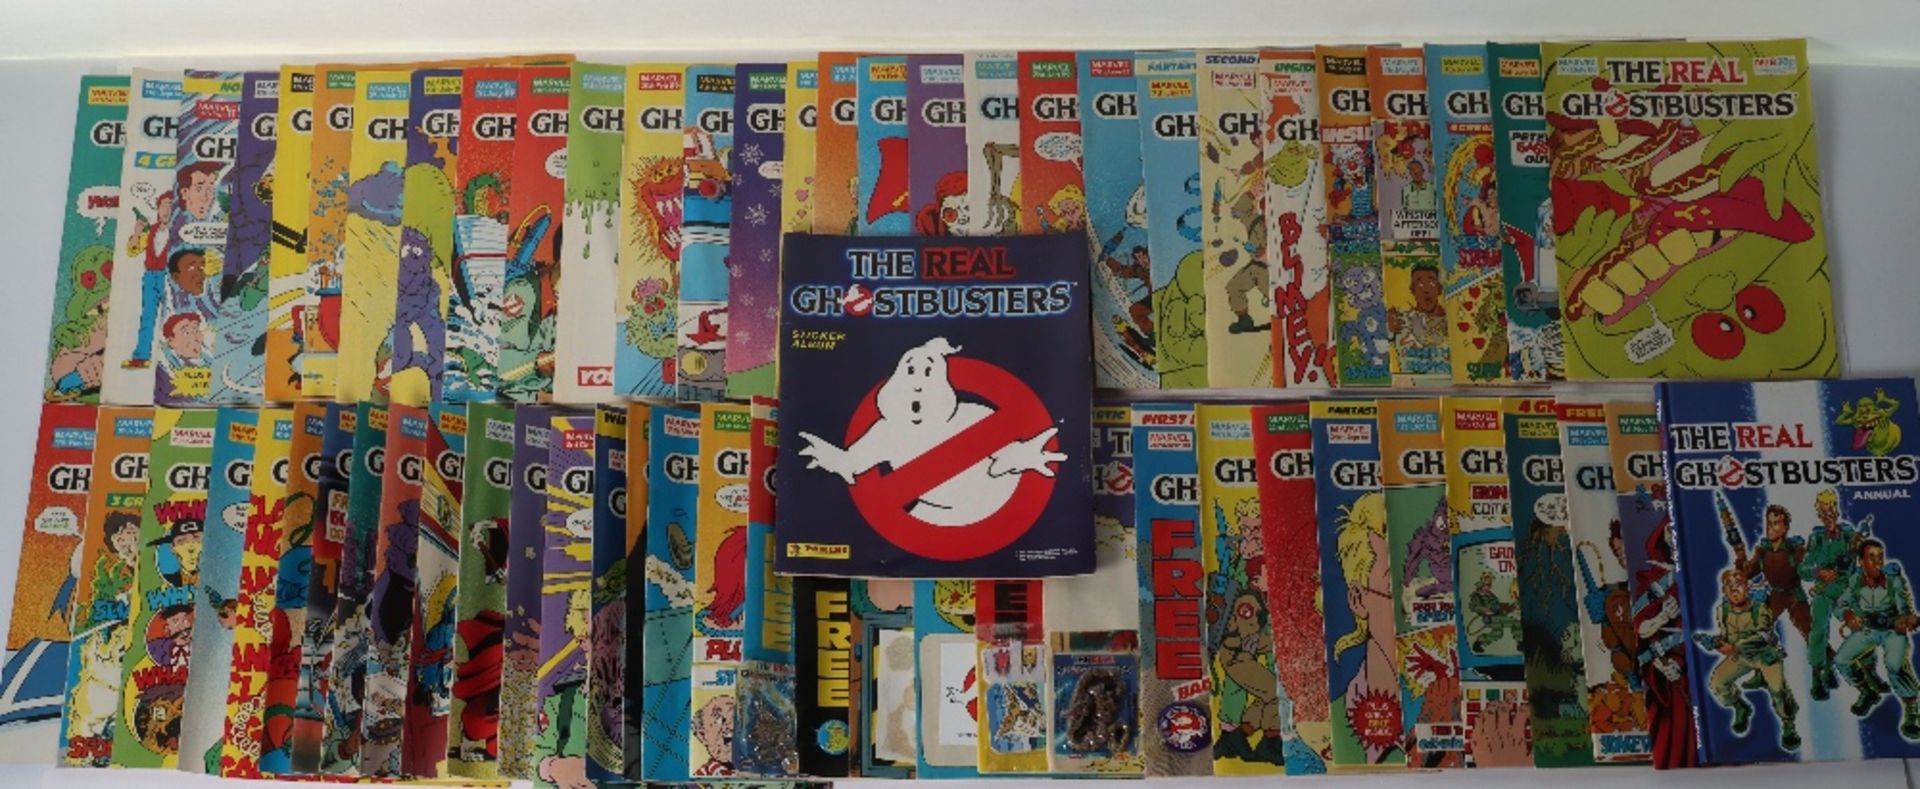 The Real Ghostbusters Panini sticker album and comics